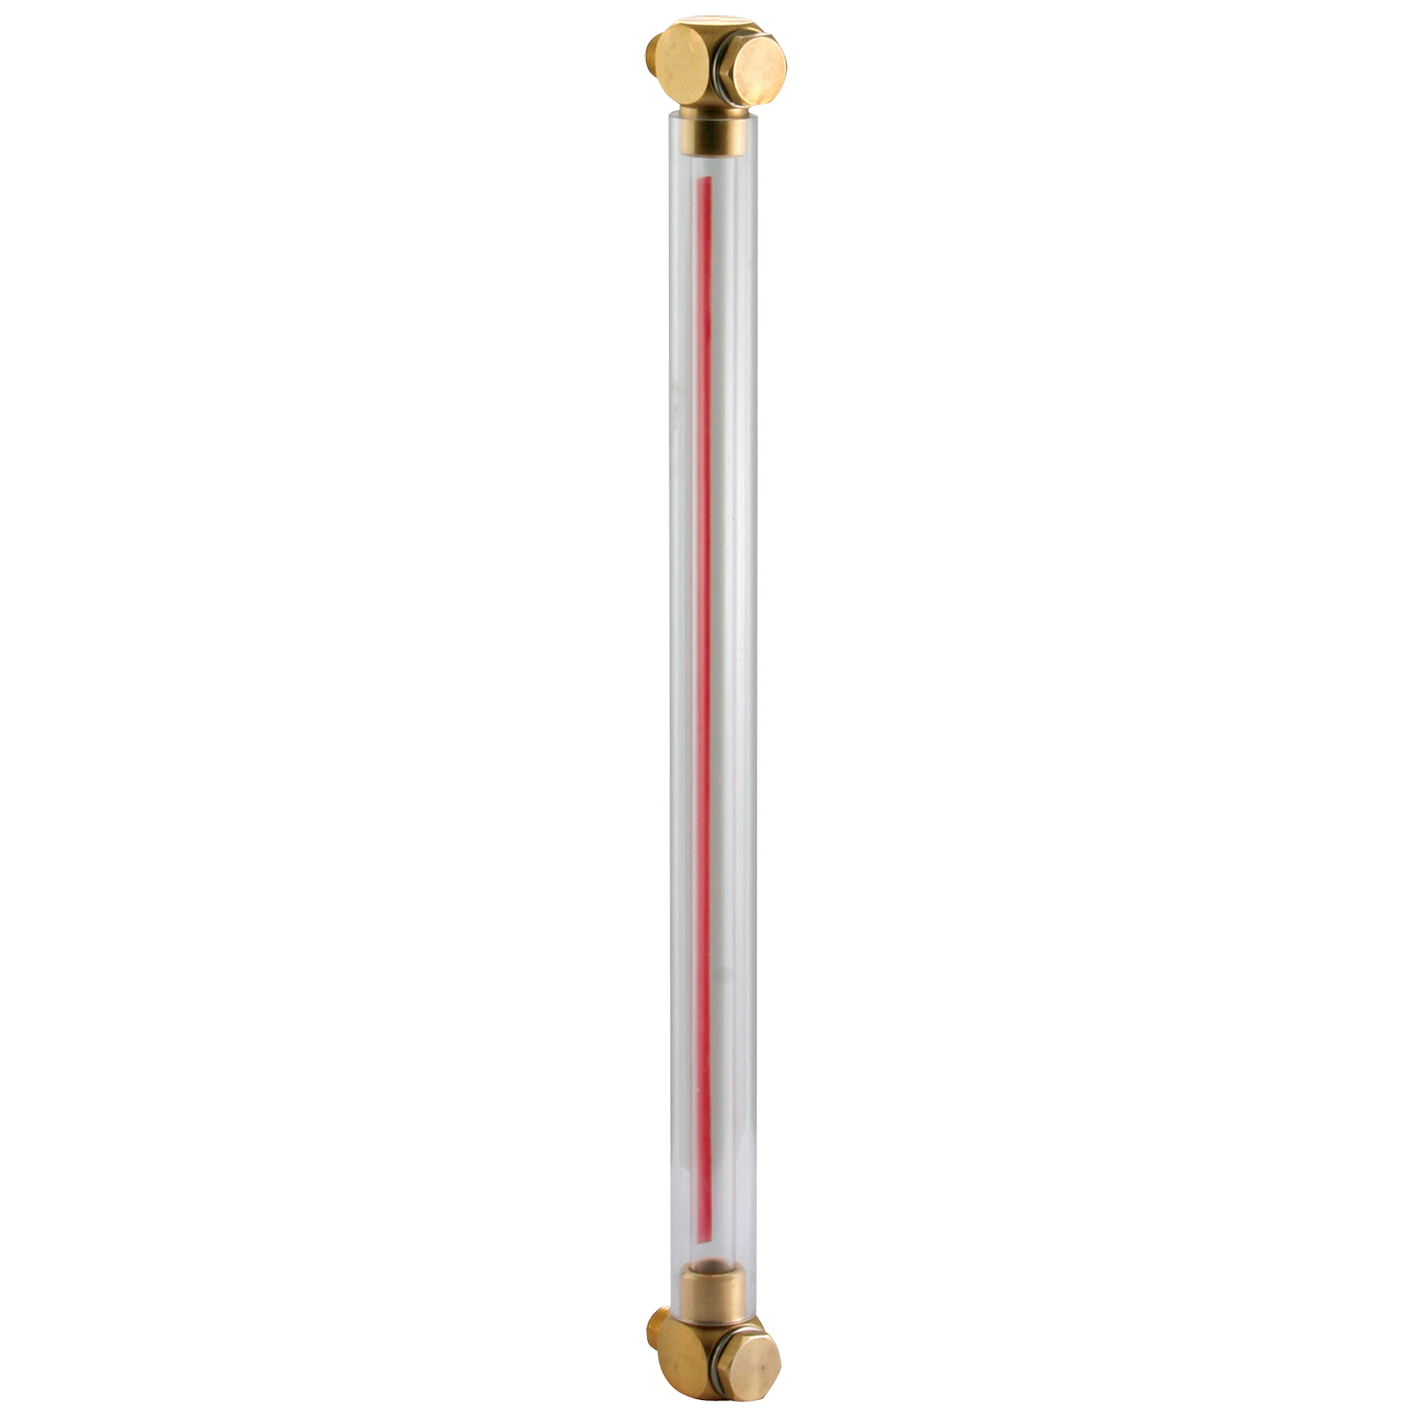 1/2" BSP Fluid Level Gauge W/O Thermometer Centres 250mm